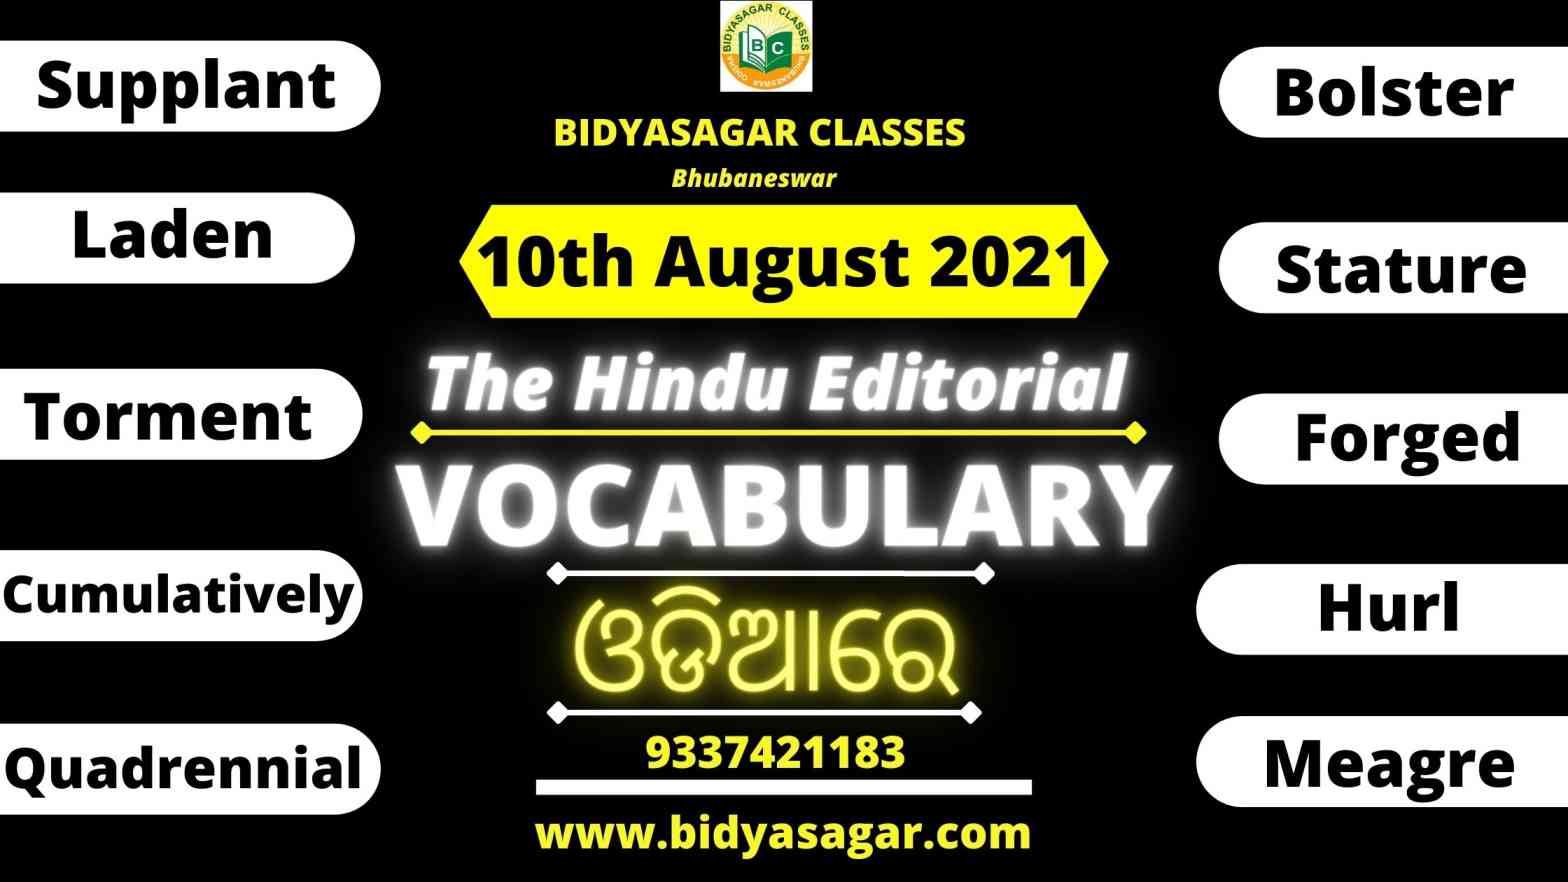 The Hindu Editorial Vocabulary of 10th August 2021